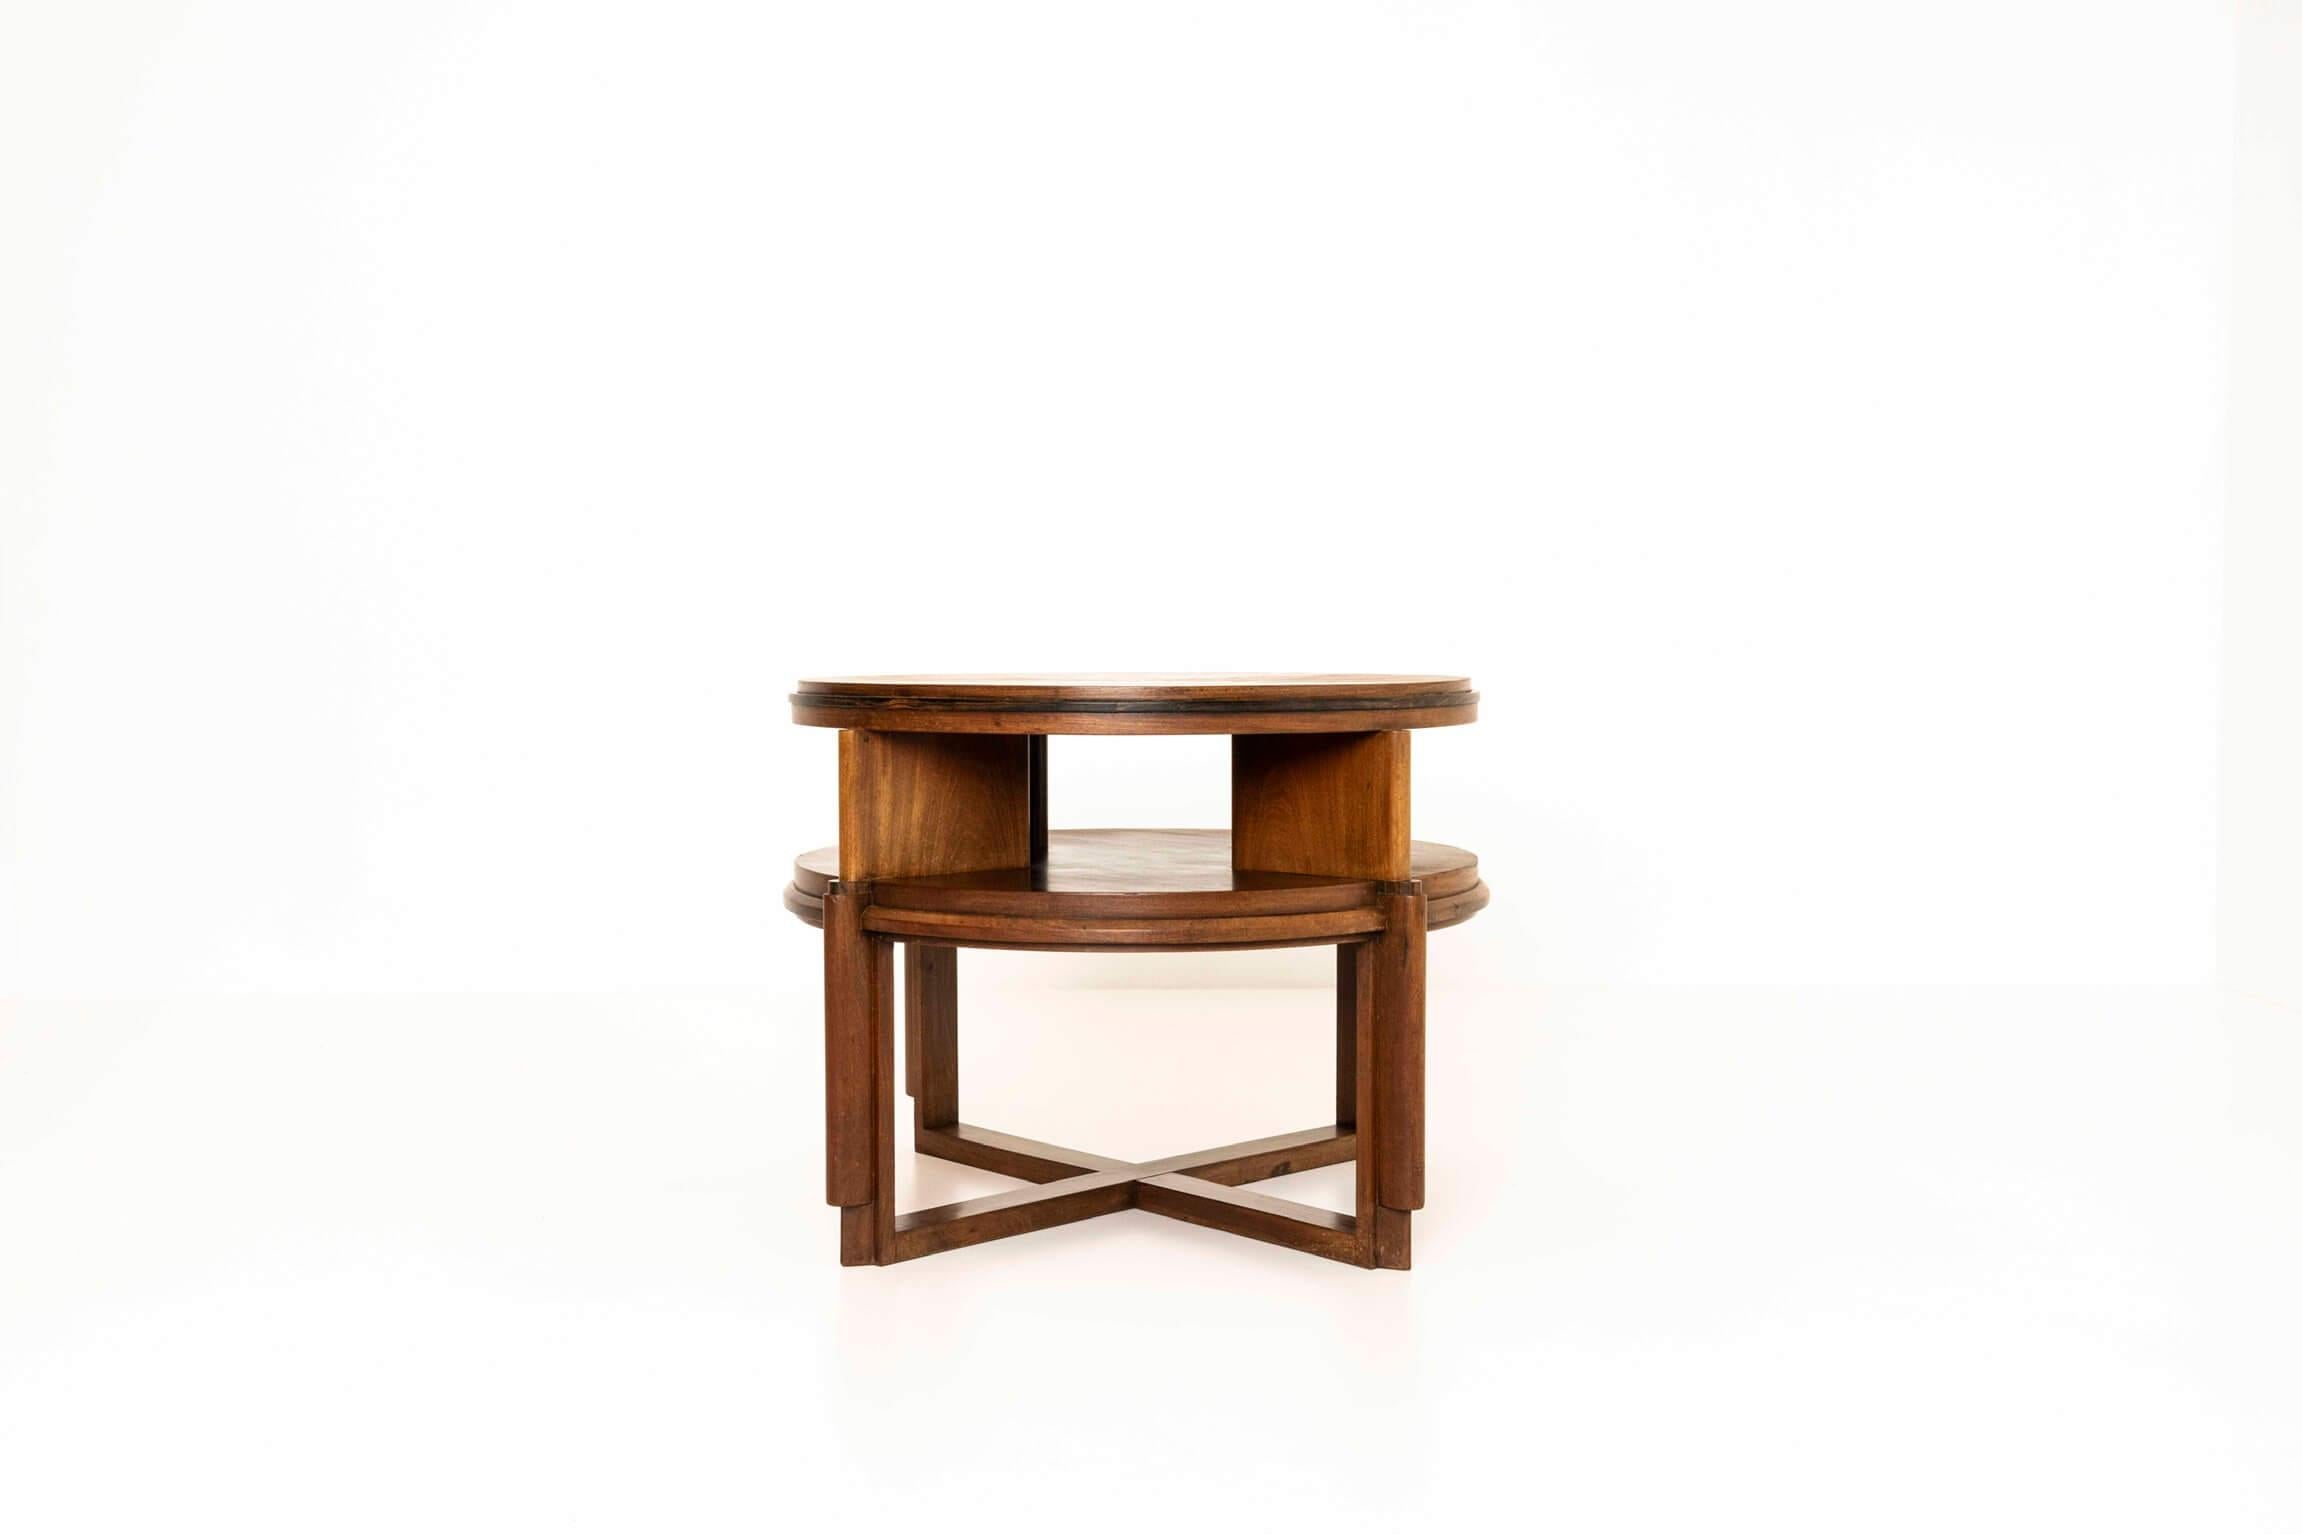 Well-designed Amsterdam School round coffee table from the Netherlands 1930s. This table has a cross-shaped base with two functional layers. The details on the four legs and the top make this a very special table. The top has a beautiful wood